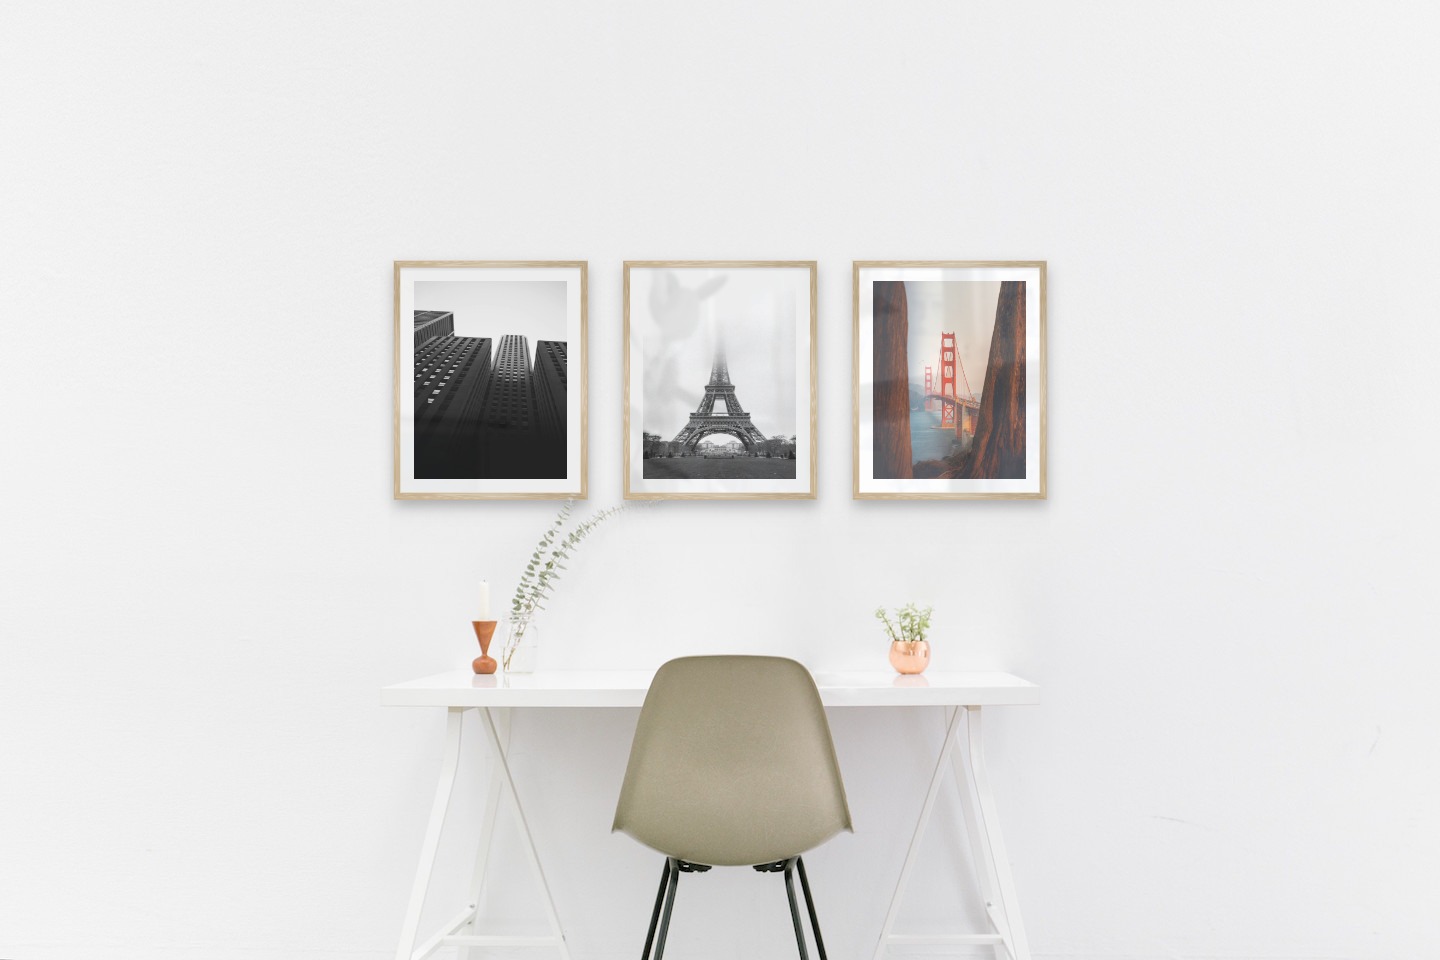 Gallery wall with picture frames in wood in sizes 40x50 with prints "High buildings", "Eifel tower with fog" and "Golden Gate Bridge"